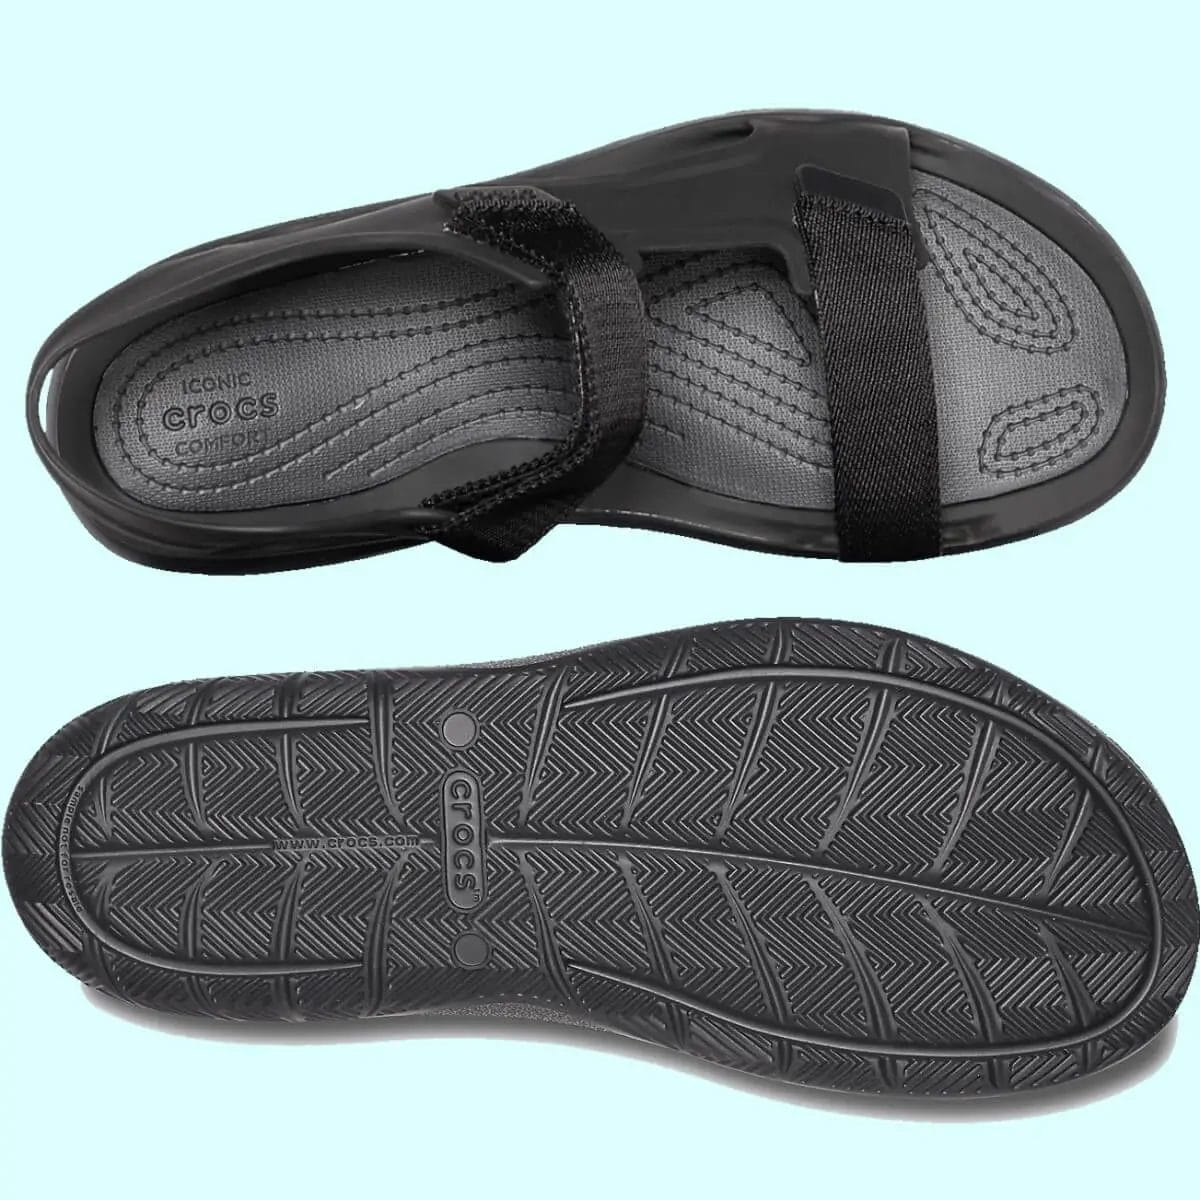 Side by side views of the vamp forefoot and the outsole of the Crocs Swiftwater Expedition Sandal